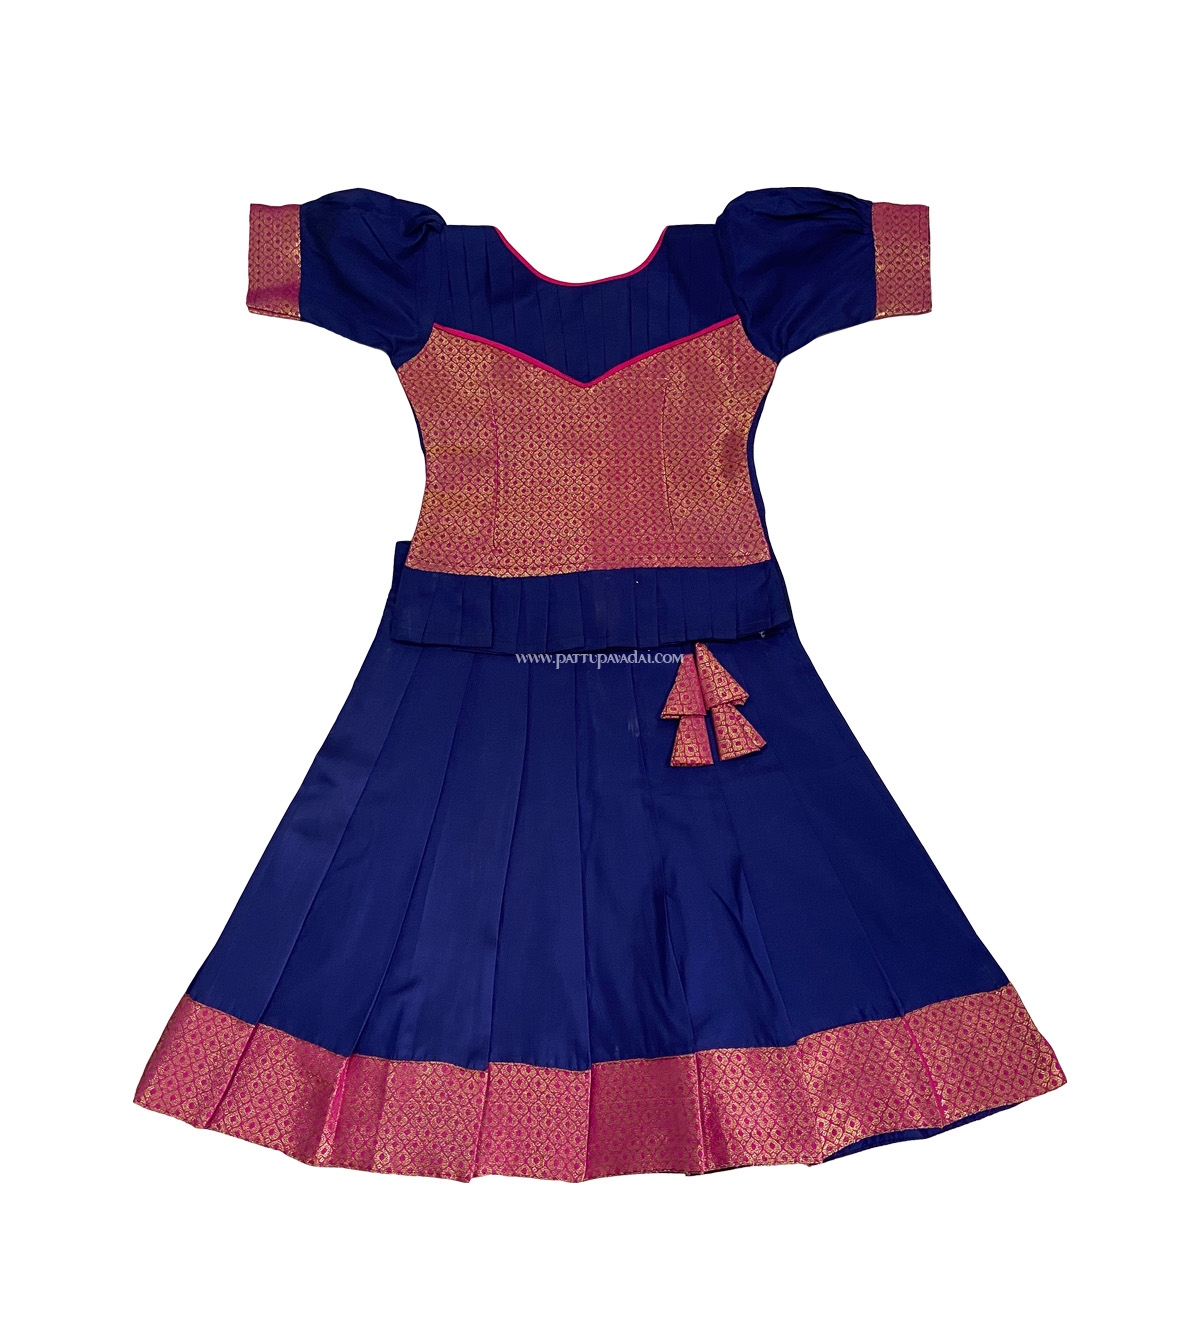 Kids Magenta and Navy Blue Skirt and Top